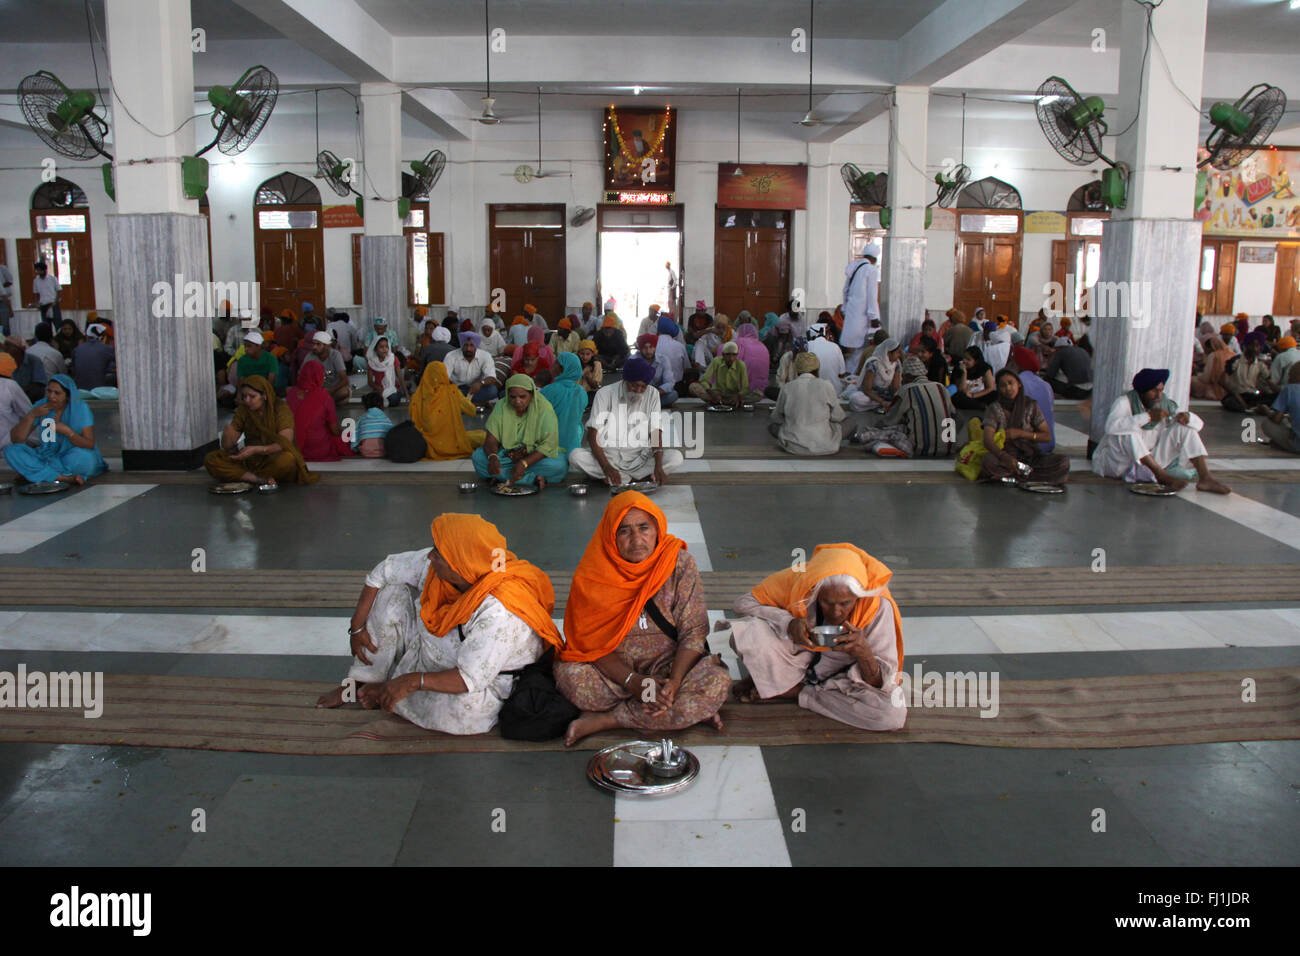 The Refectory of the Golden temple, Amritsar , India Stock Photo